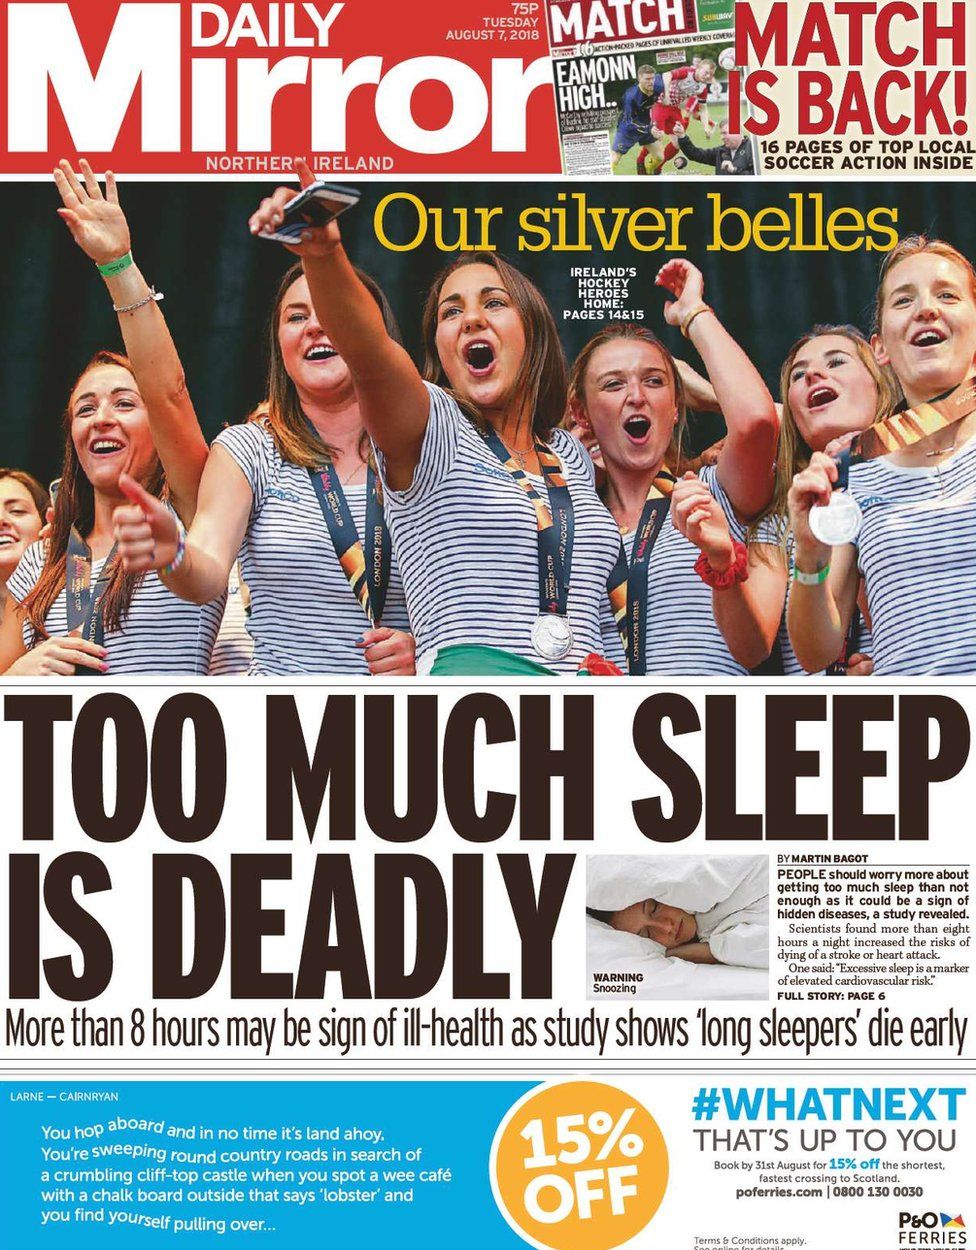 Daily Mirror front page Tuesday 7 August